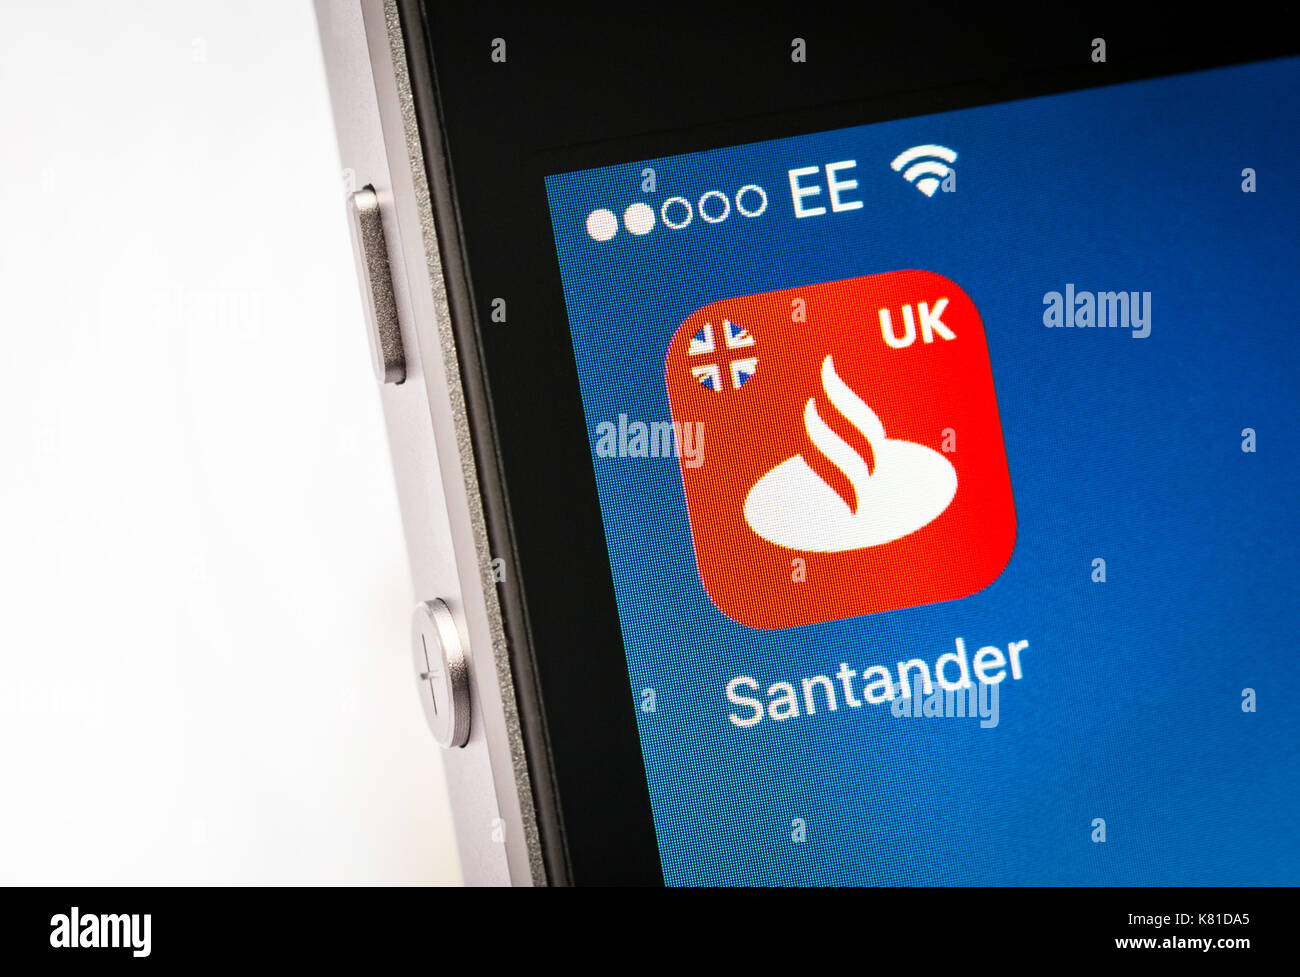 Santander mobile banking app on an iPhone mobile phone Stock Photo